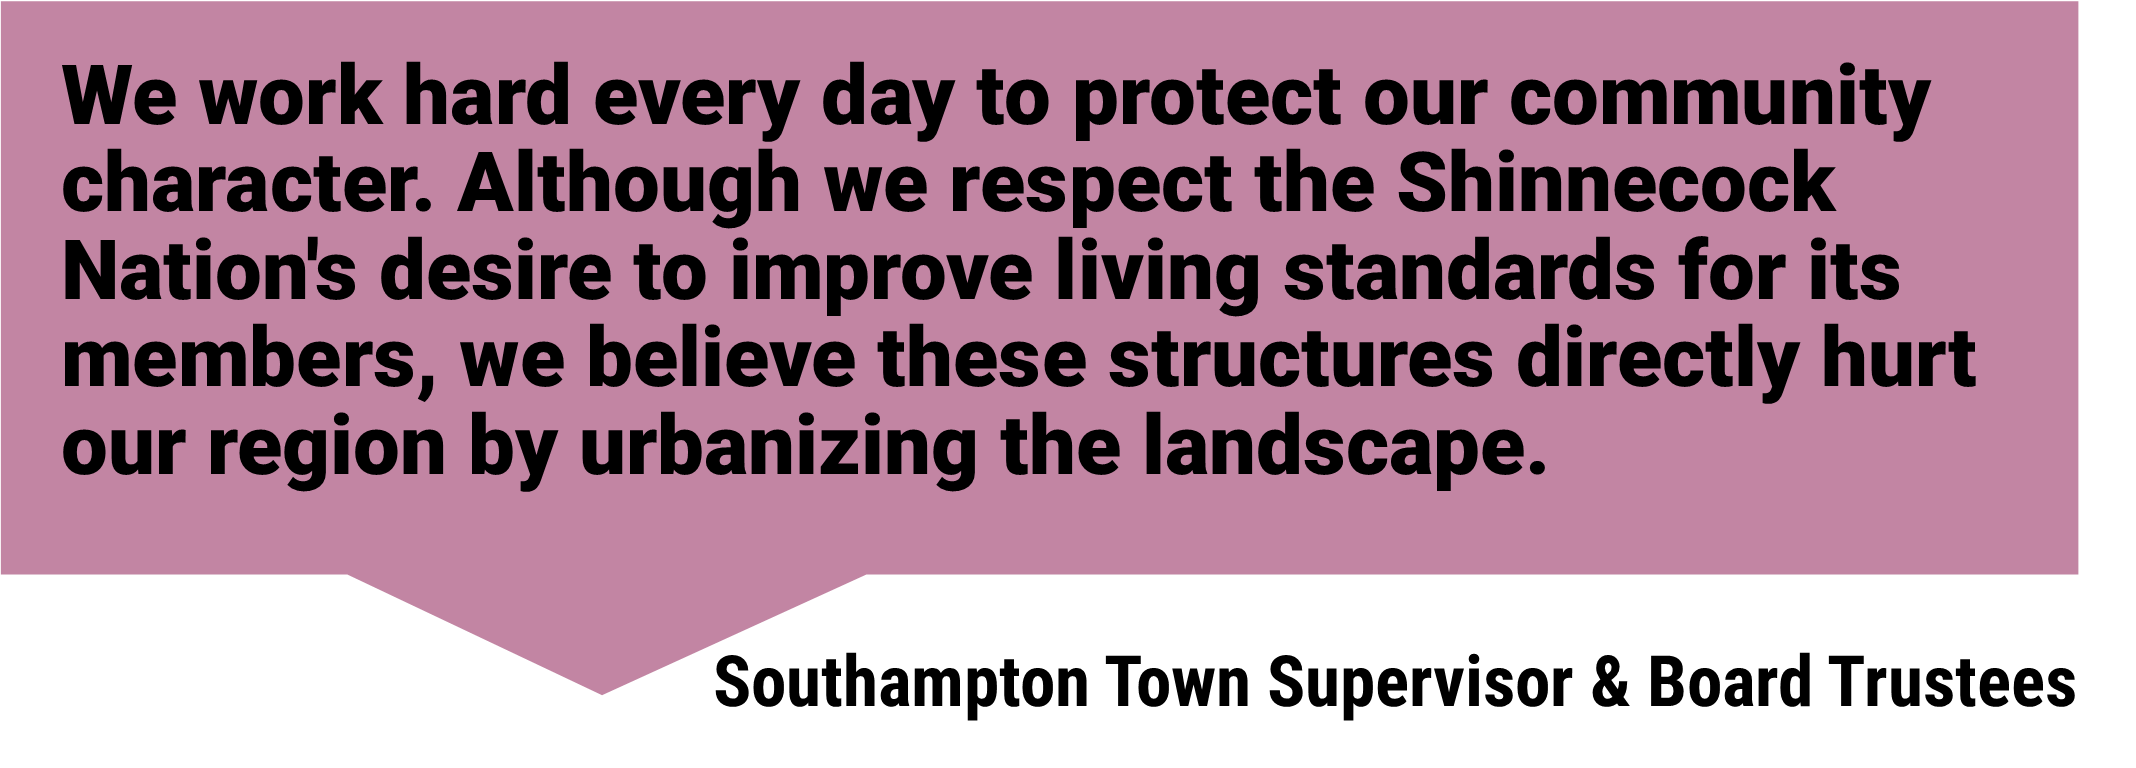 “We work hard every day to protect our community character. Although we respect the Shinnecock Nation's desire to improve living standards for its members, we believe these structures directly hurt our region by urbanizing the landscape.’ Southampton Town Supervisor & Board Trustees